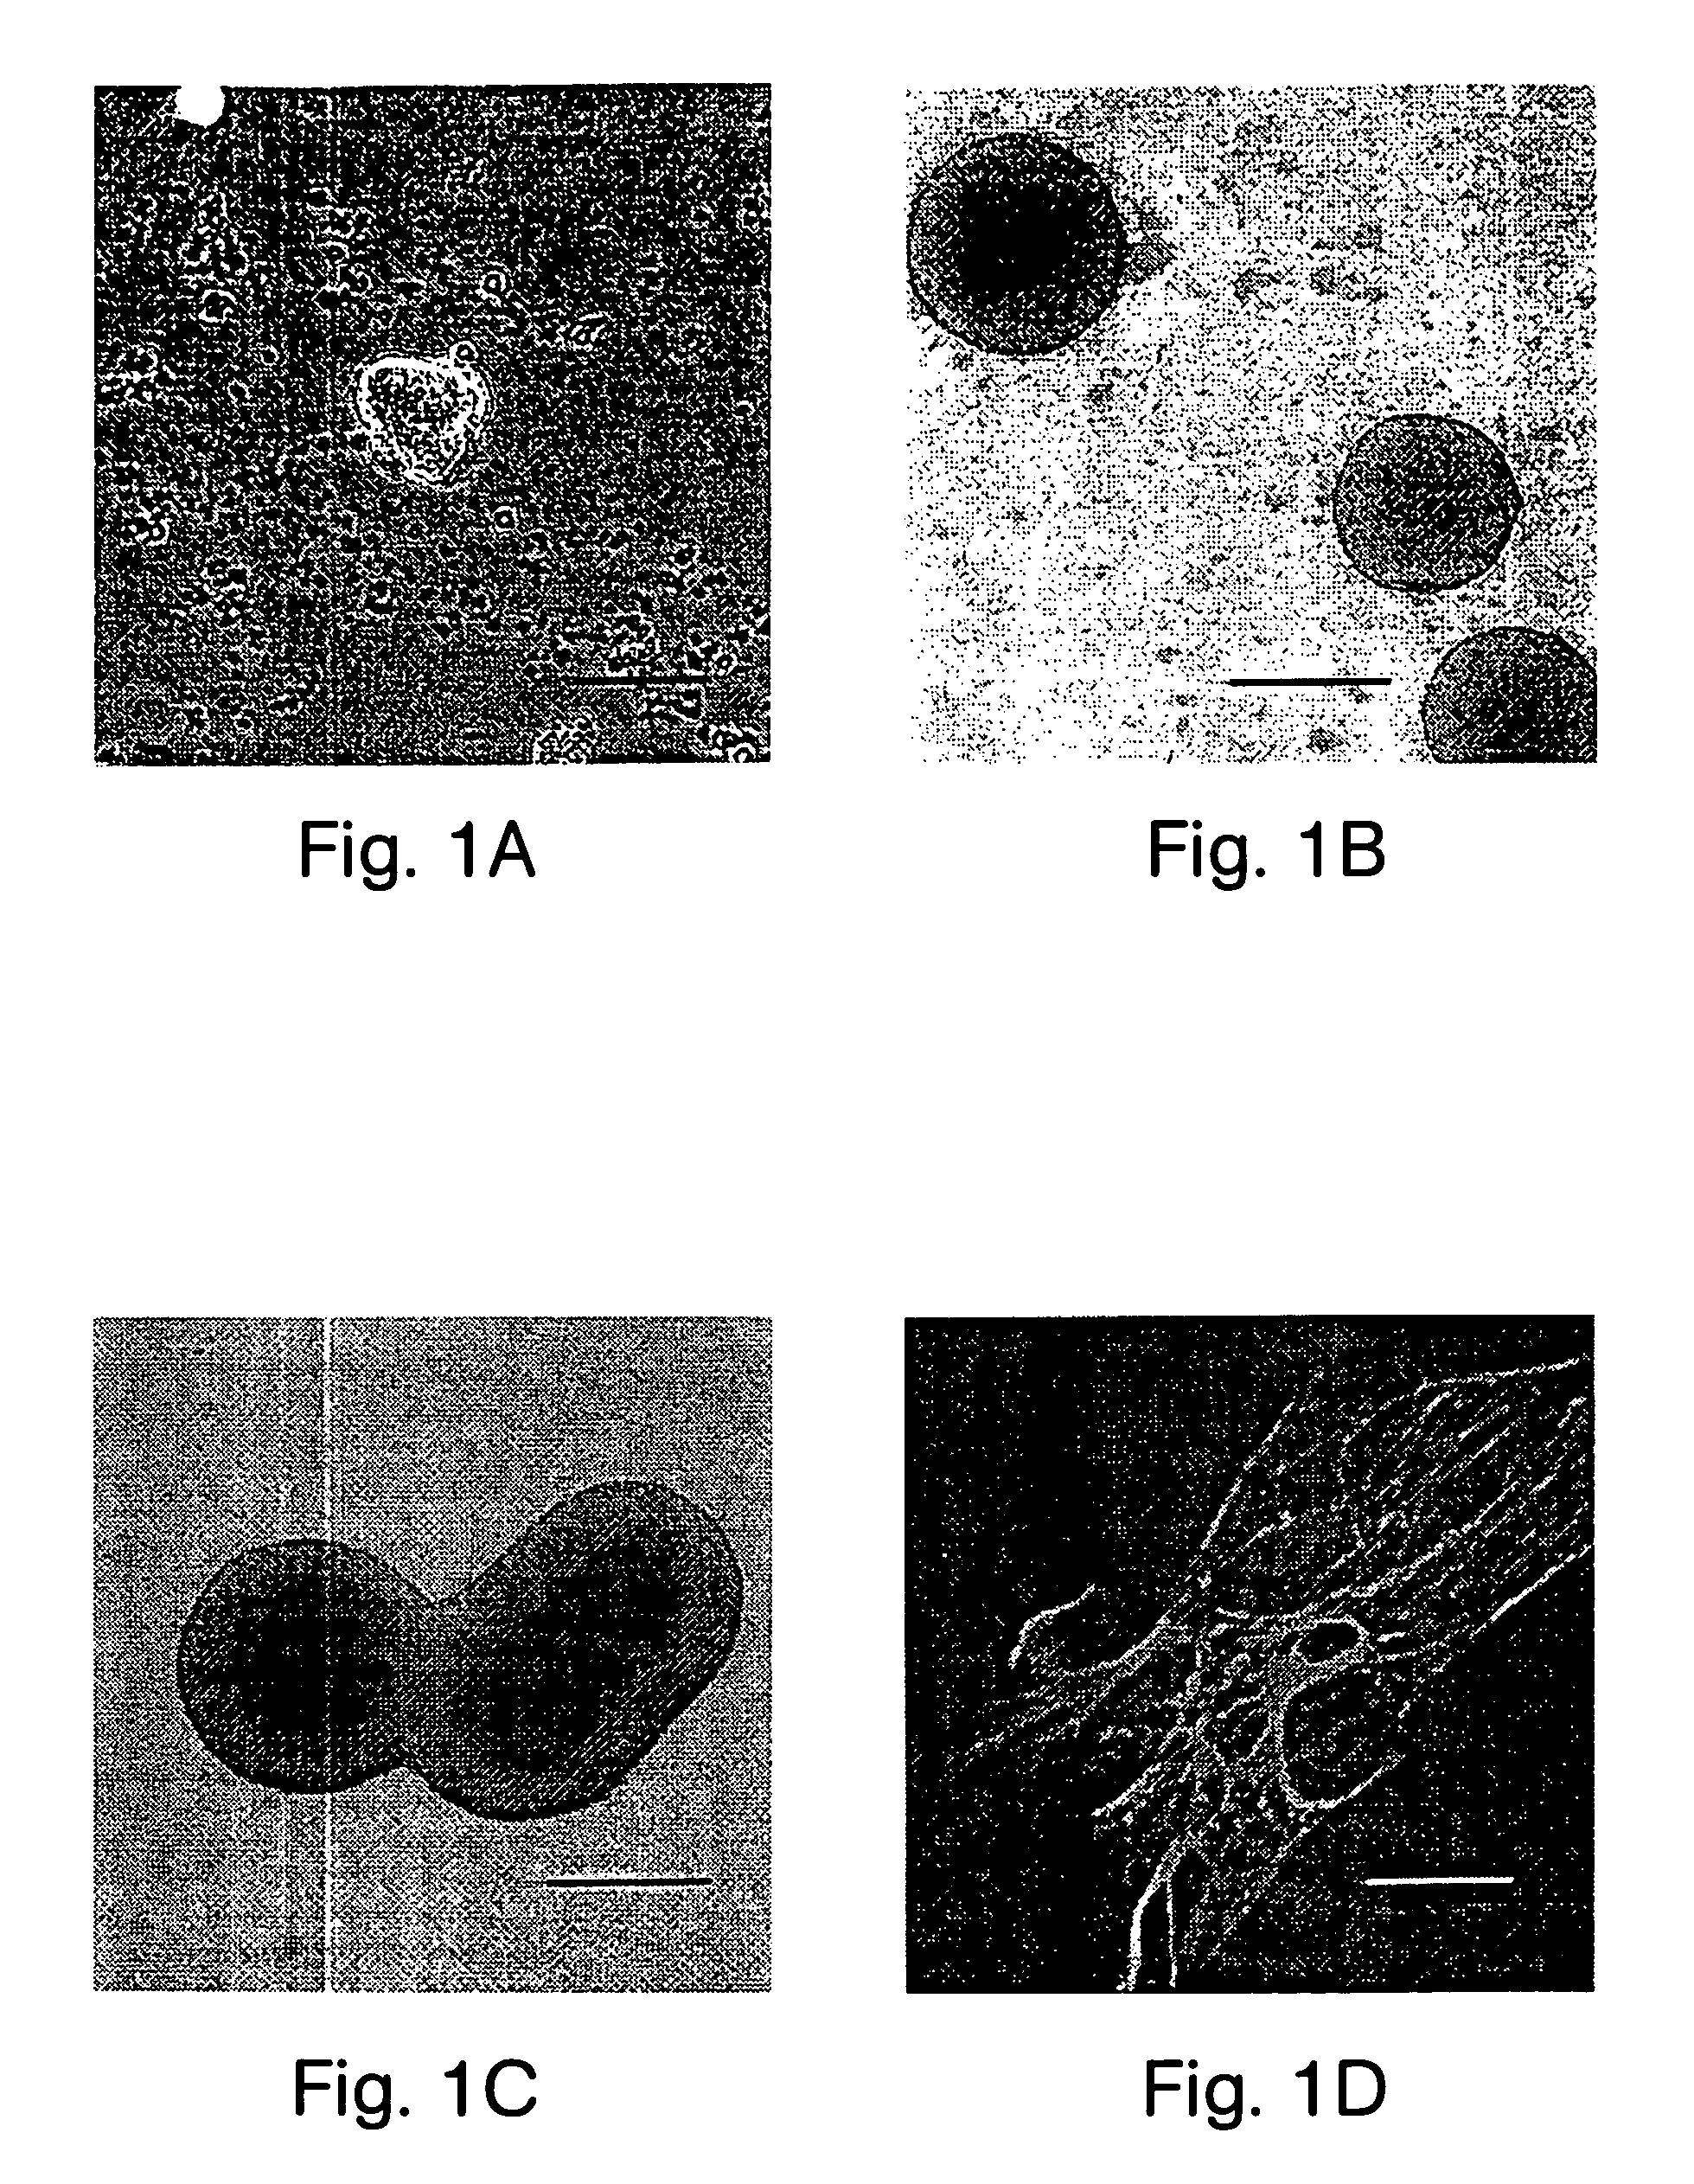 Pharmaceuticals containing multipotential precursor cells from tissues containing sensory receptors